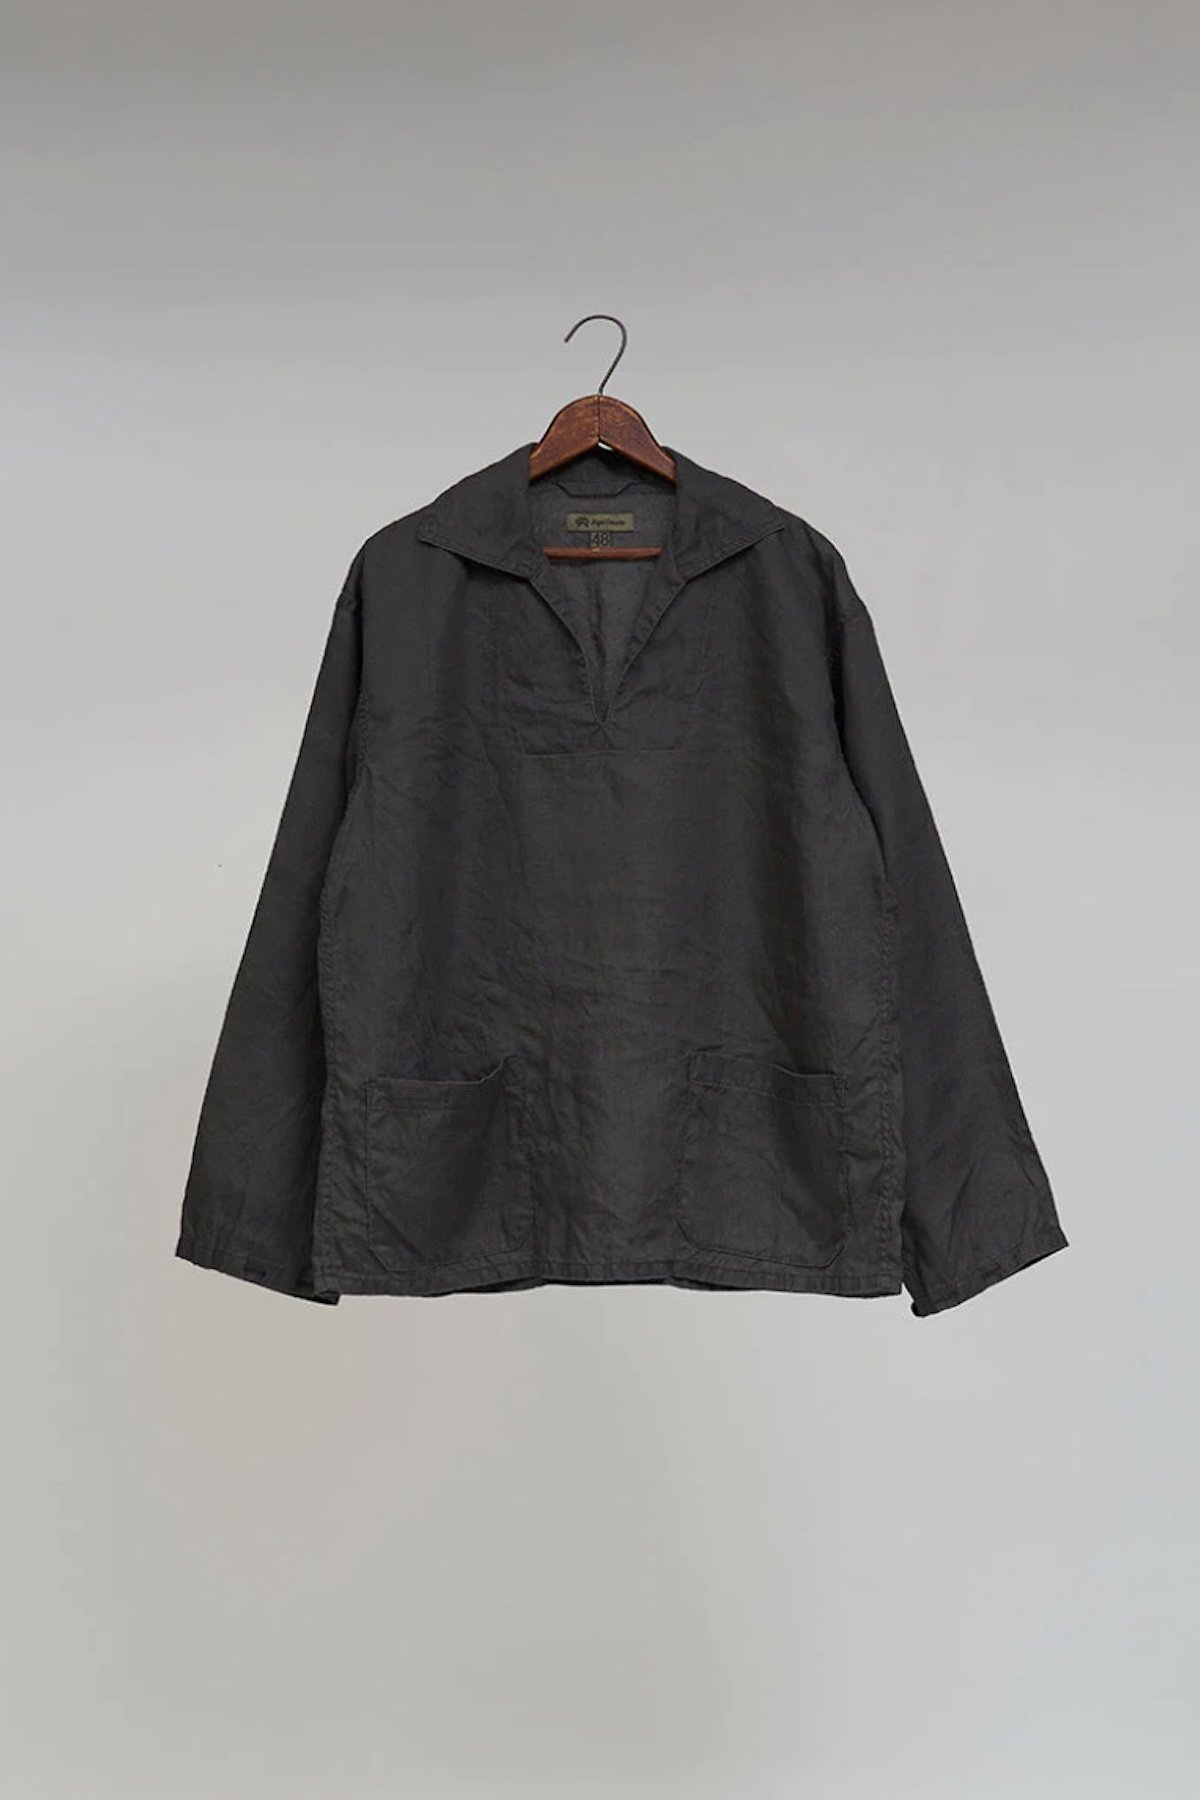 ◯ Nigel Cabourn - FRENCH PULLOVER SHIRT HEMP - CHARCOAL GREY